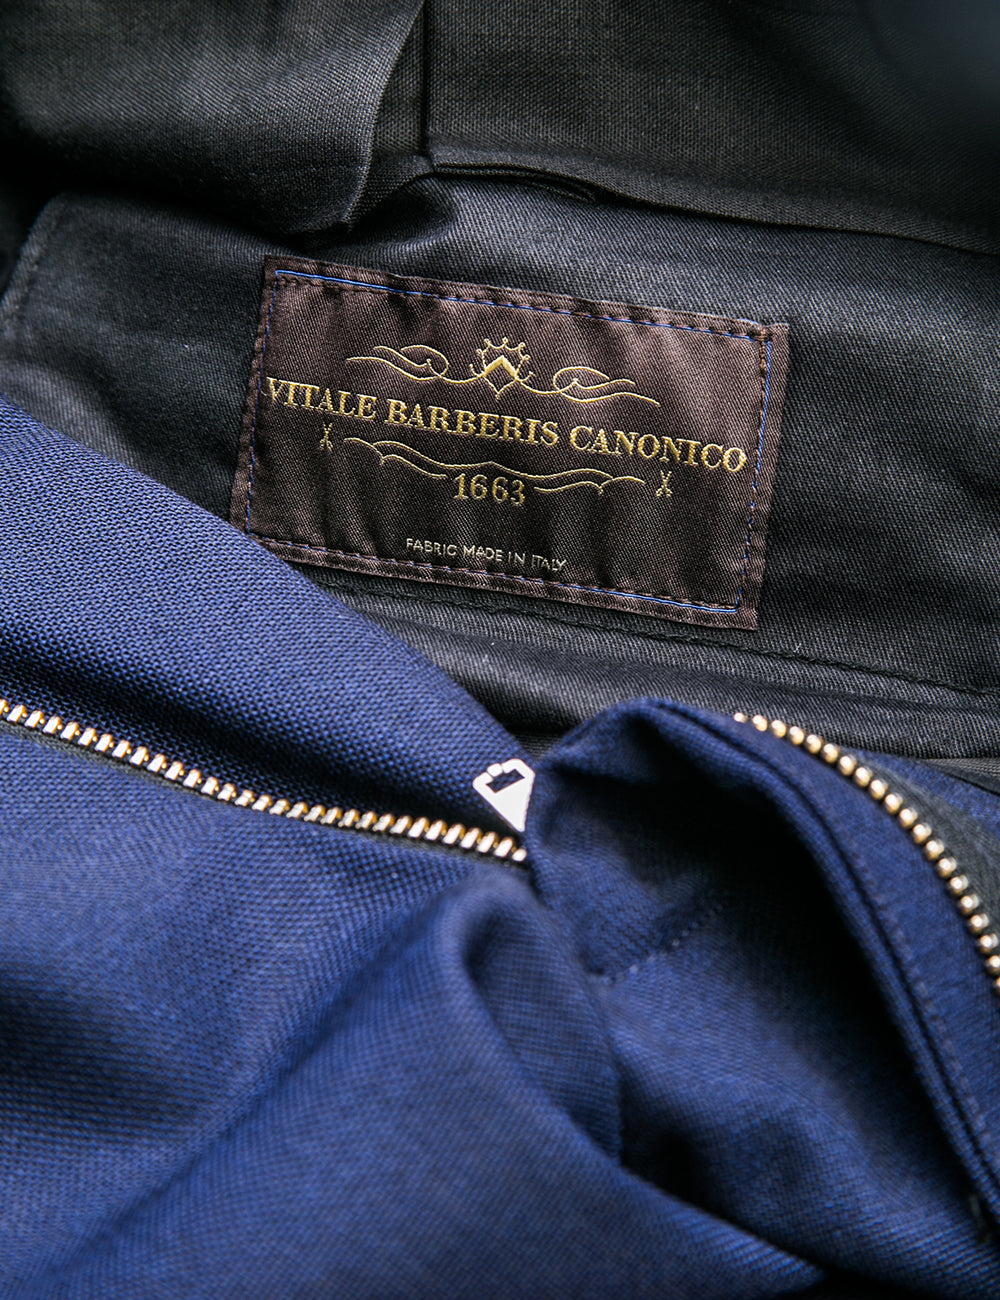 Detail shot of BKT50 Tailored Trouser in Travel-Ready Wool - Vivid Navy showing interior lining and label